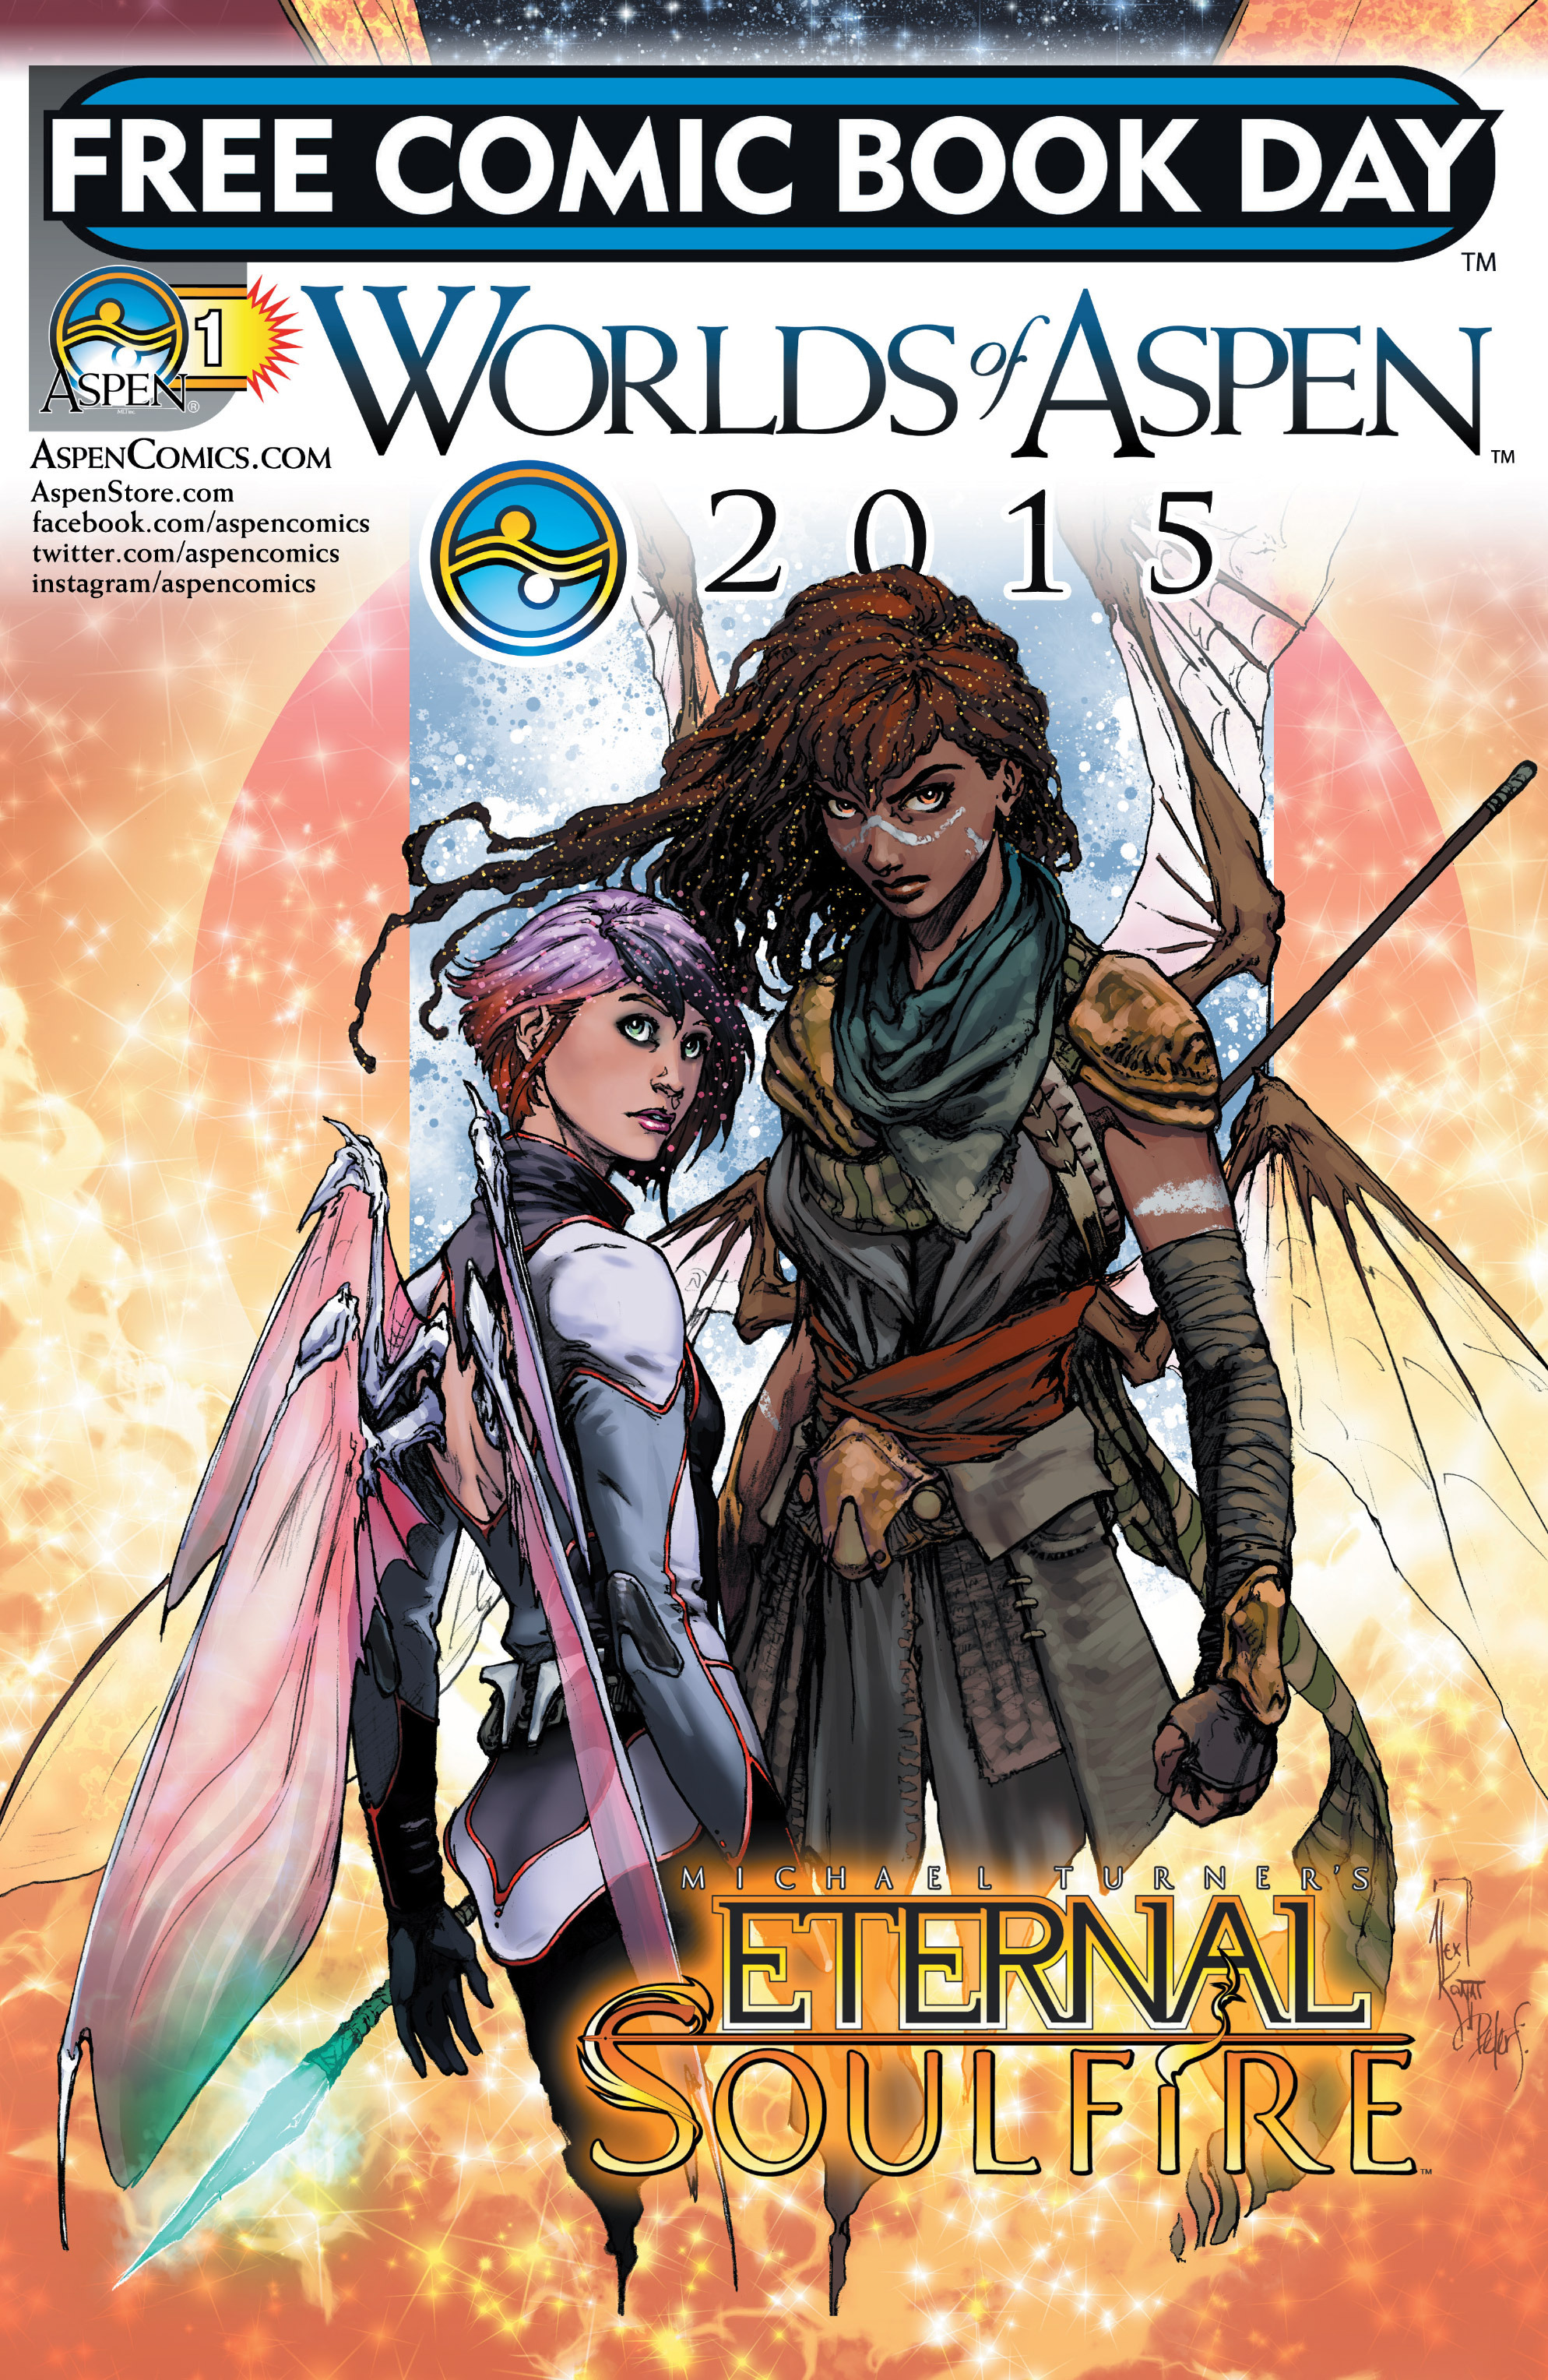 Read online Free Comic Book Day 2015 comic -  Issue # Worlds of Aspen - 1